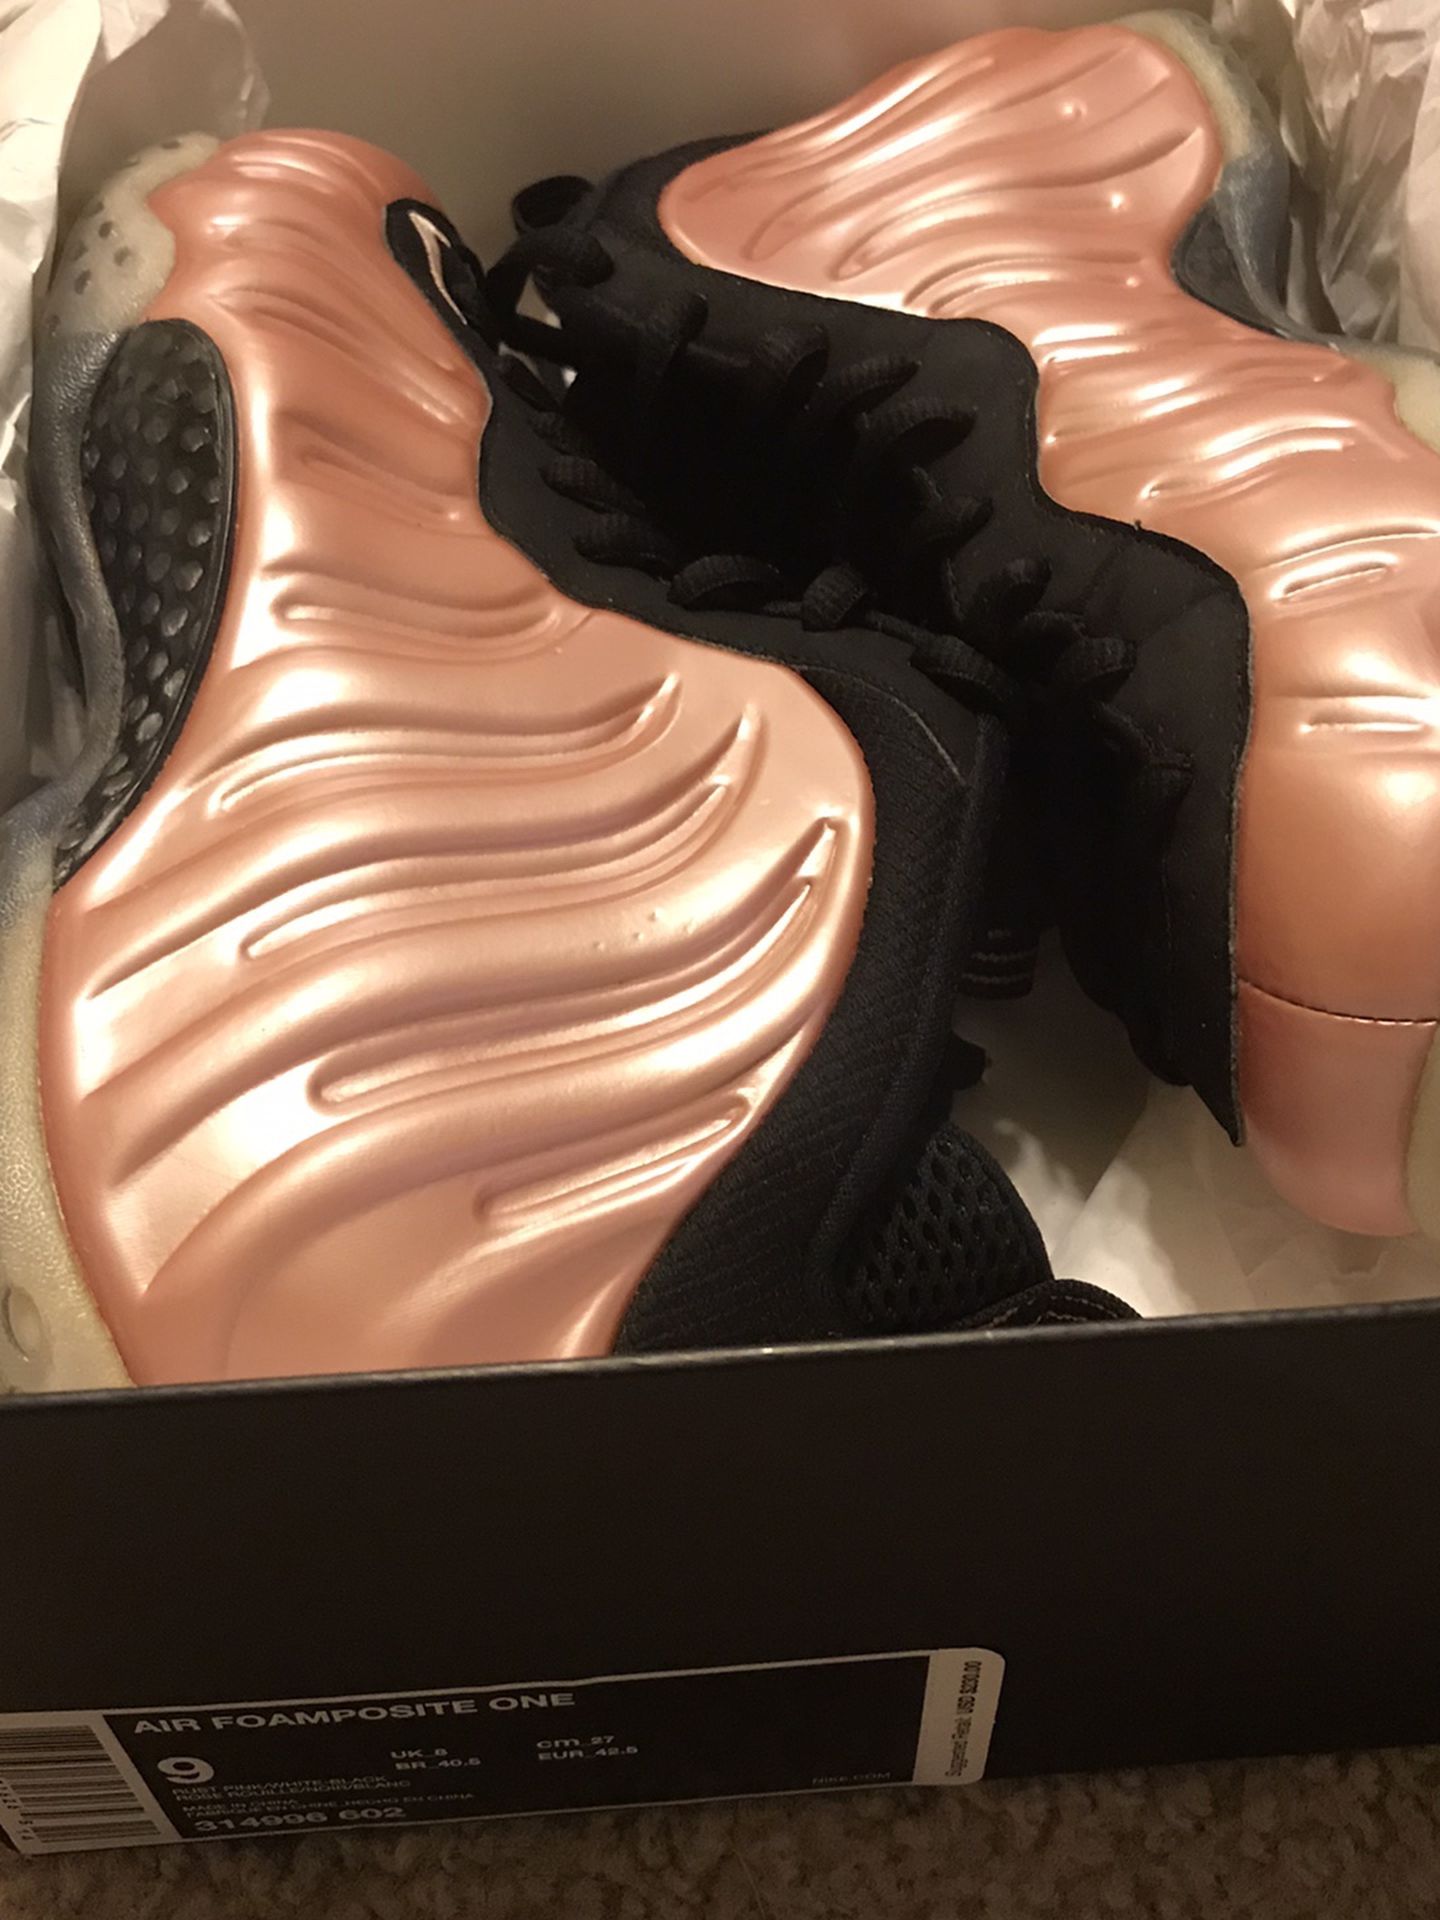 Nike air foamposite one rust pink size 9 $140